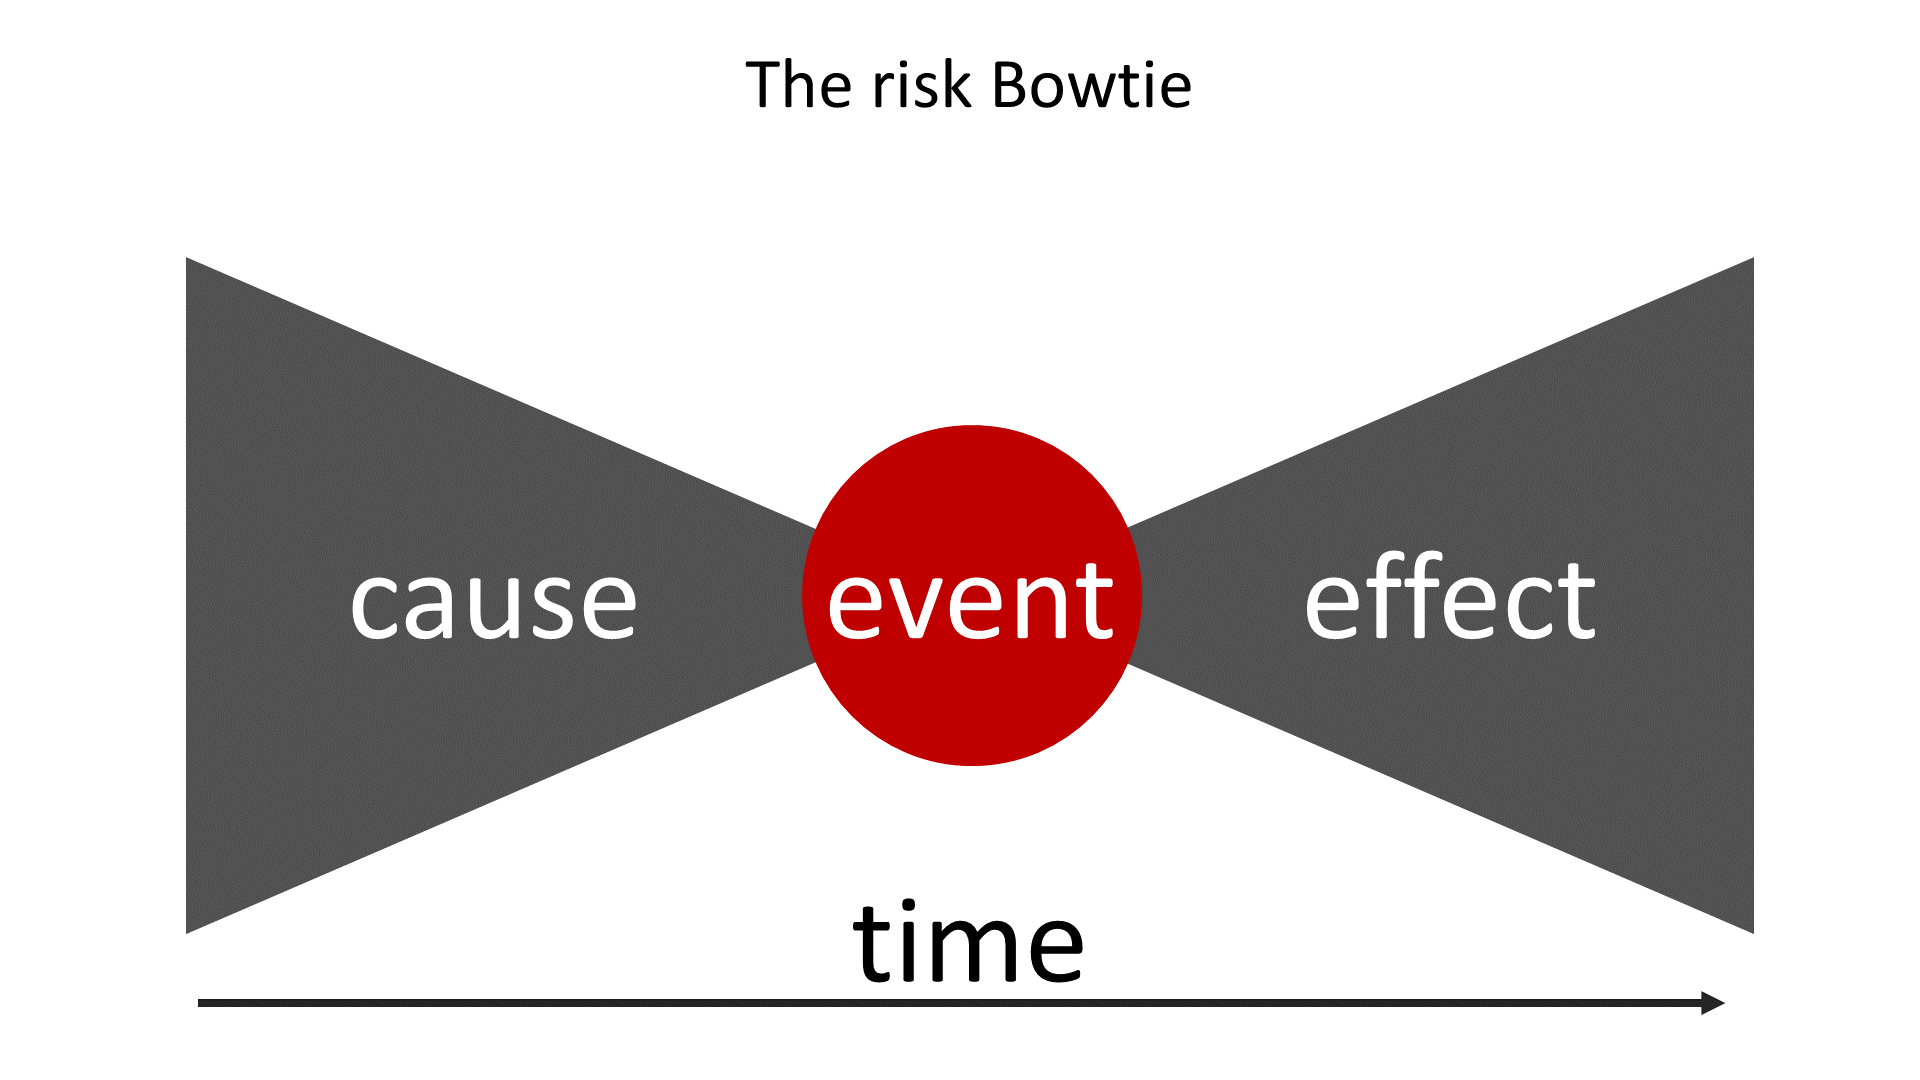 Risk bowtie diagram showing the three components of risk: cause, event and effect